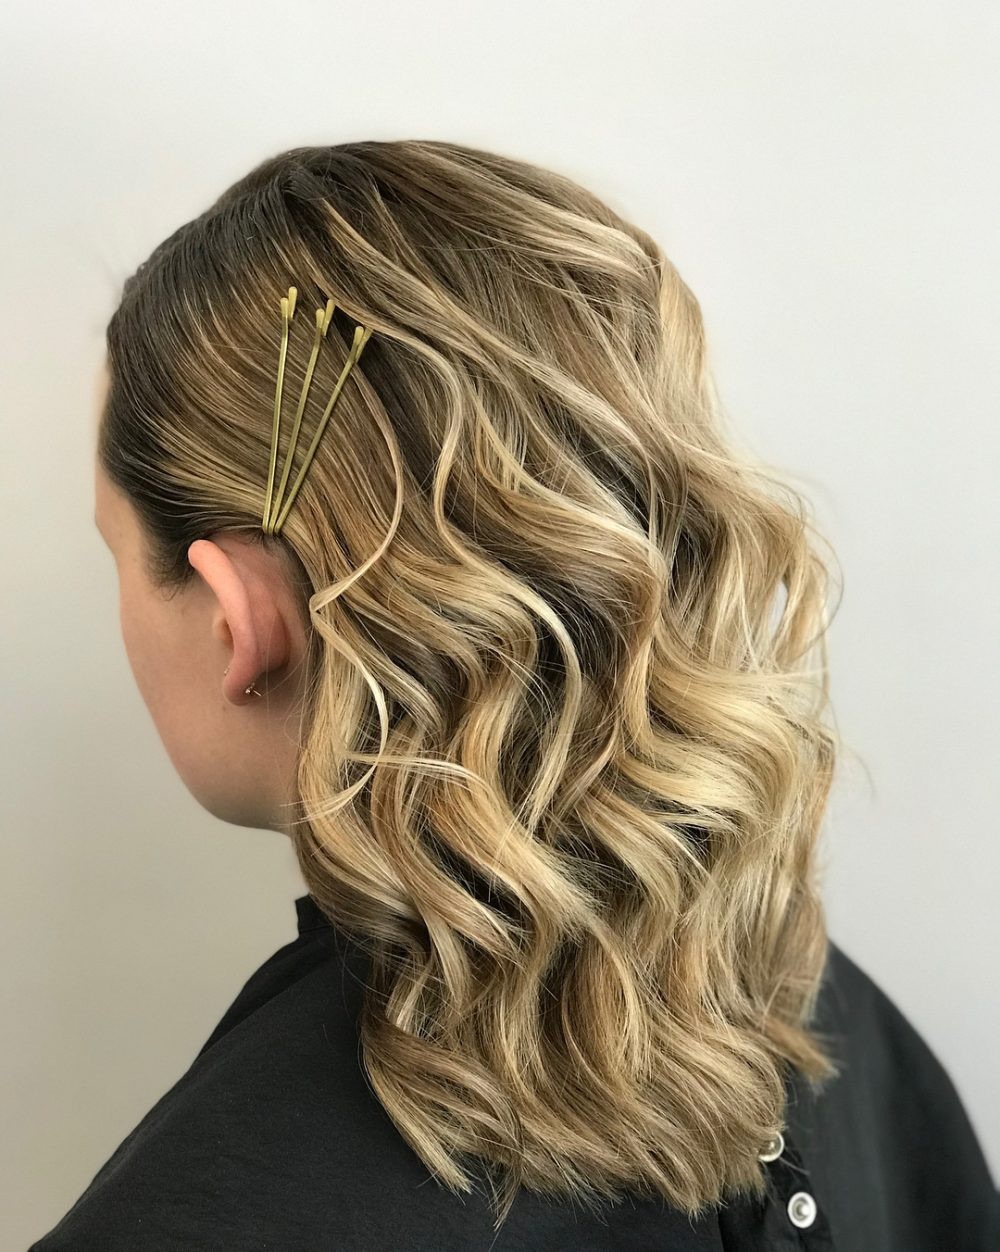 Images Of Prom Hairstyles
 20 Easy Prom Hairstyles for 2020 You Have to See